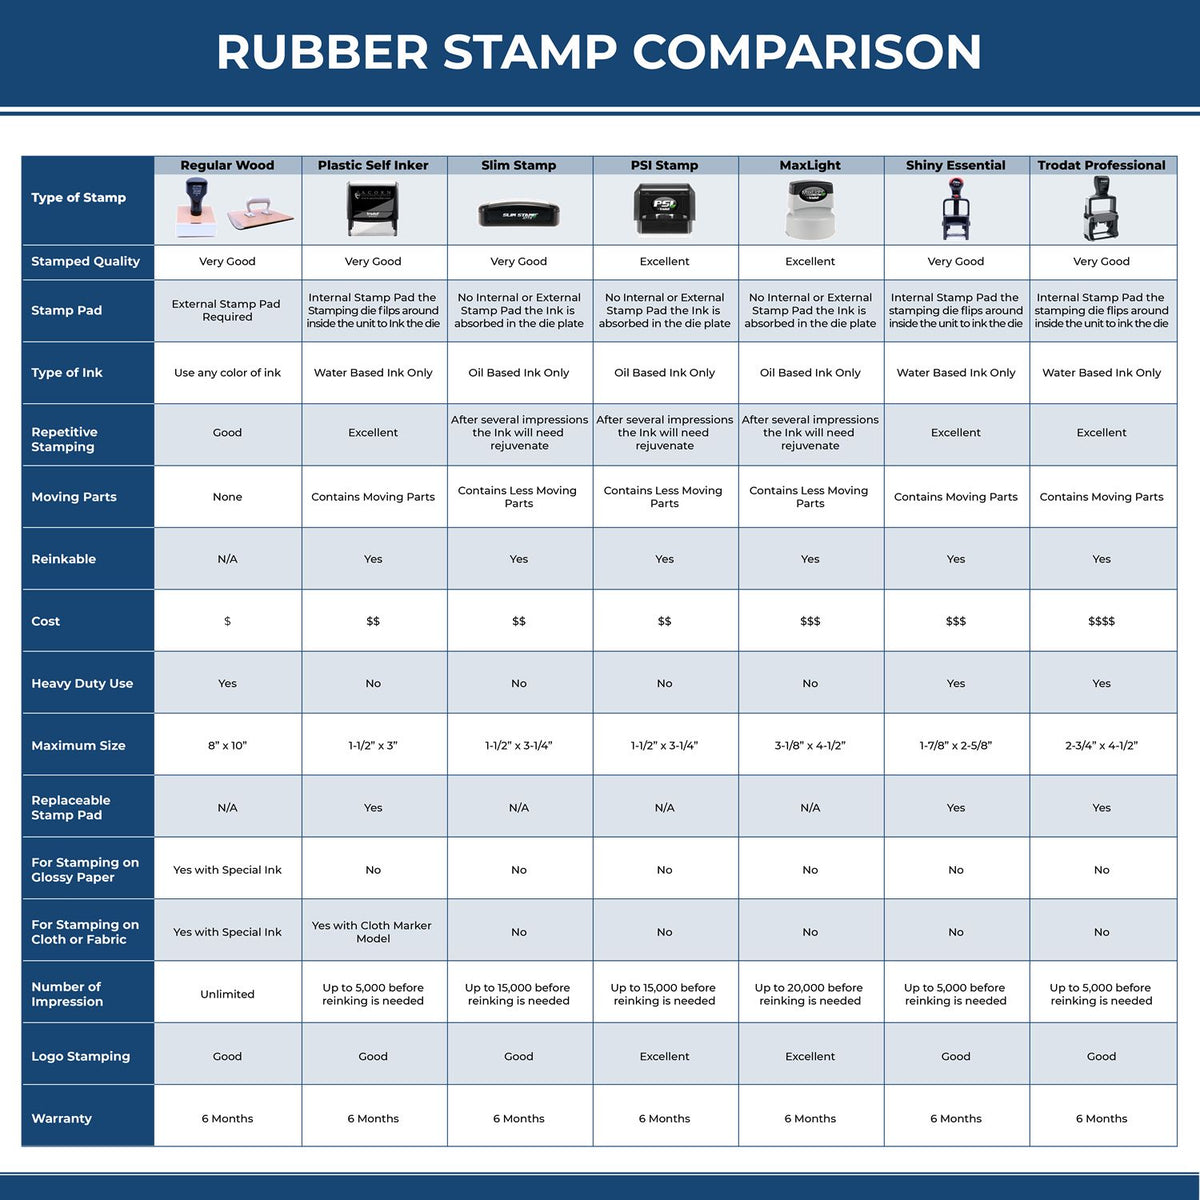 A comparison chart for the different types of mount models available for the Slim Pre-Inked Rectangular Notary Stamp for Maryland.